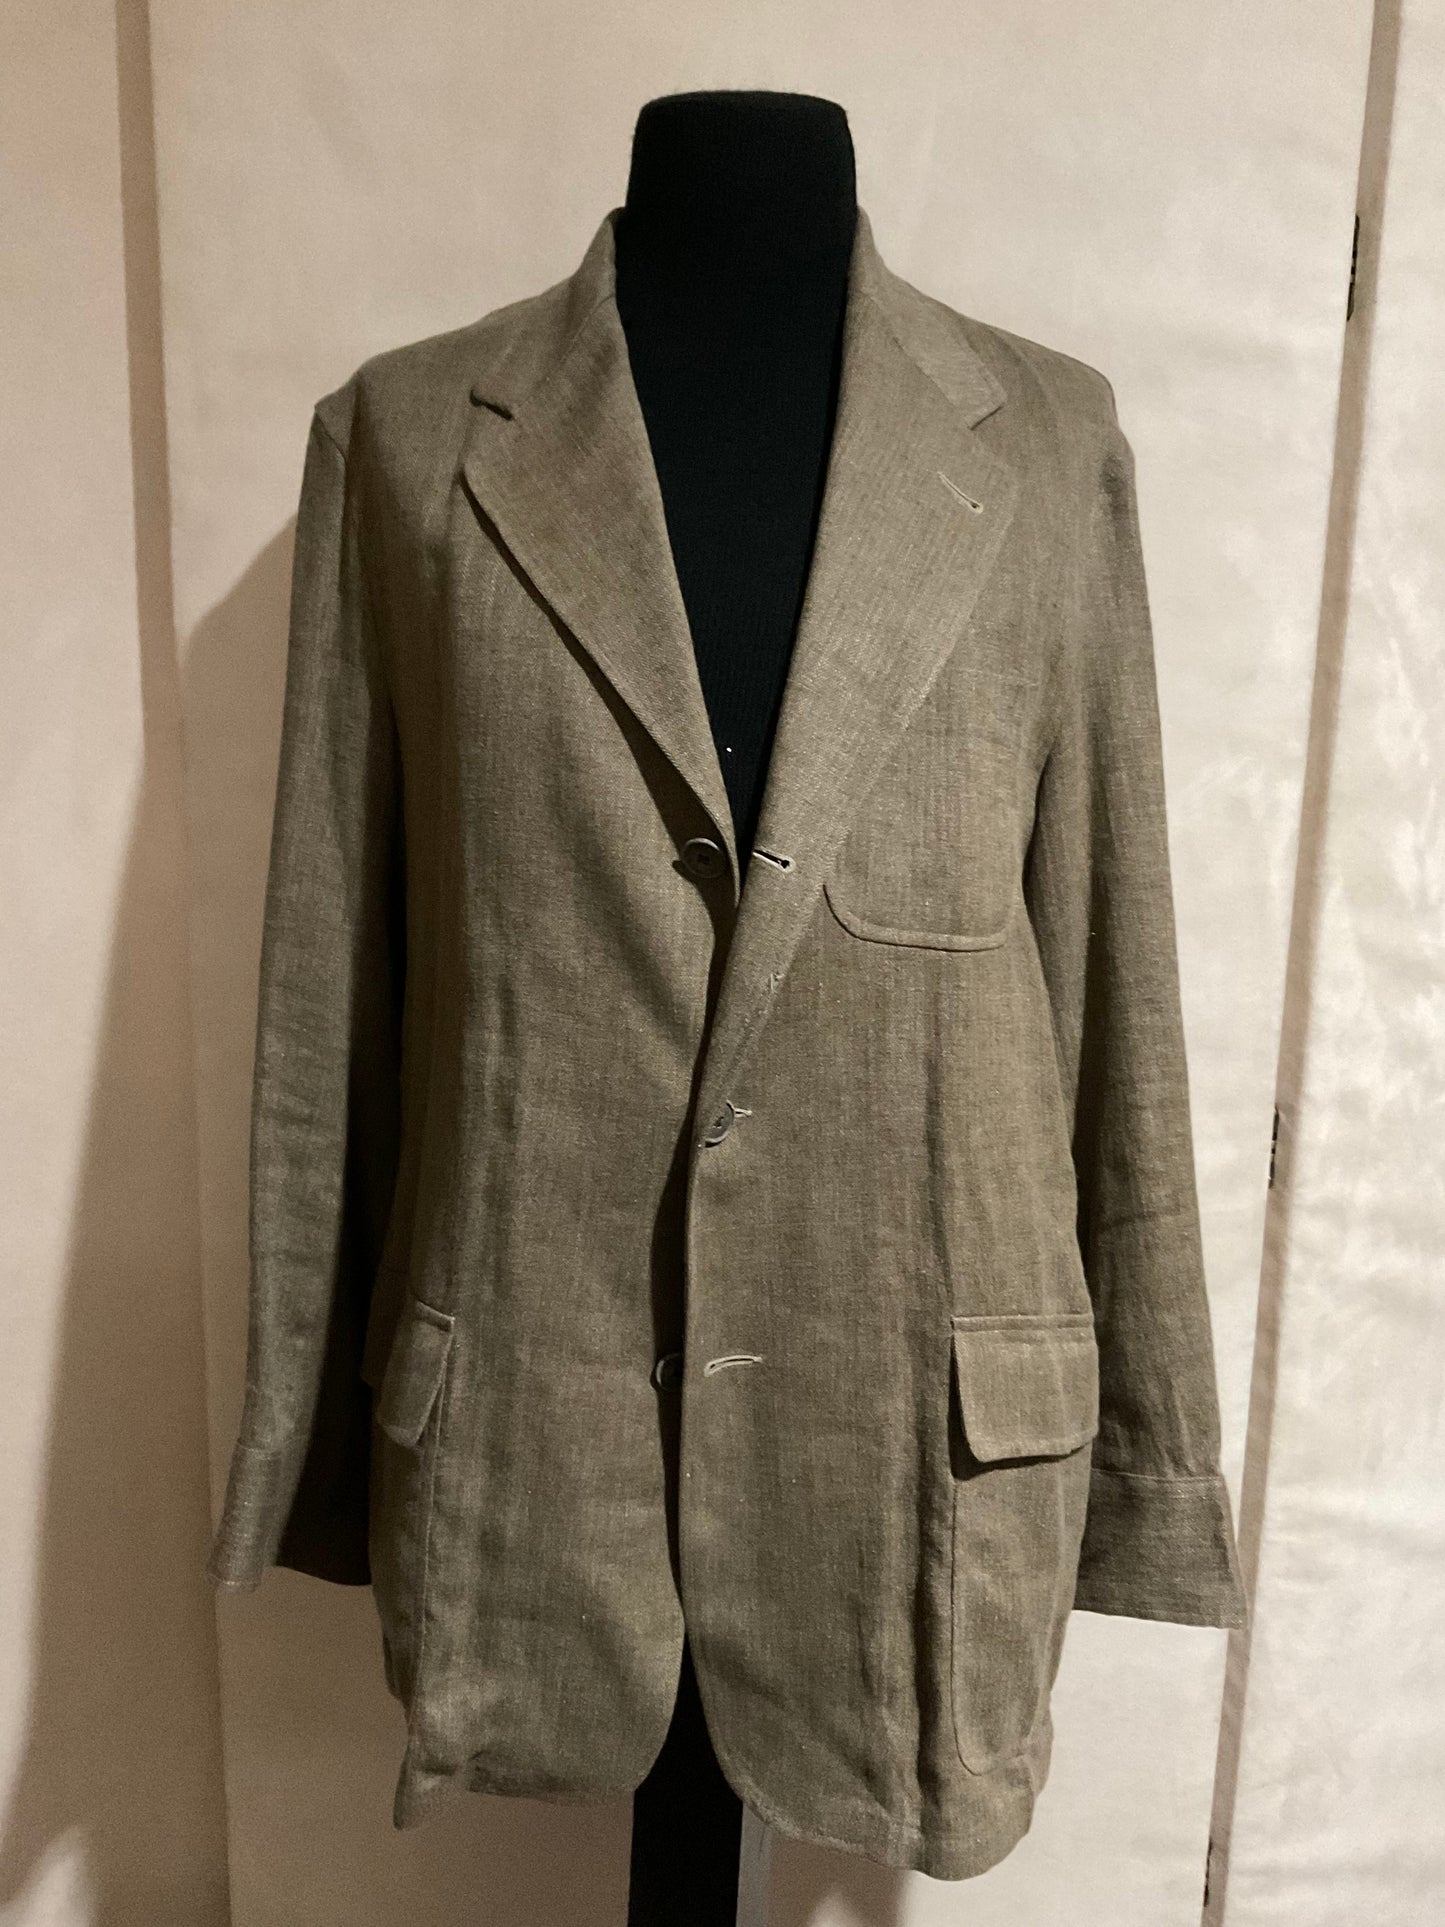 R P SUIT / OLIVE LINEN / UNCONSTRUCTED / MEDIUM - LARGE / MADE IN USA